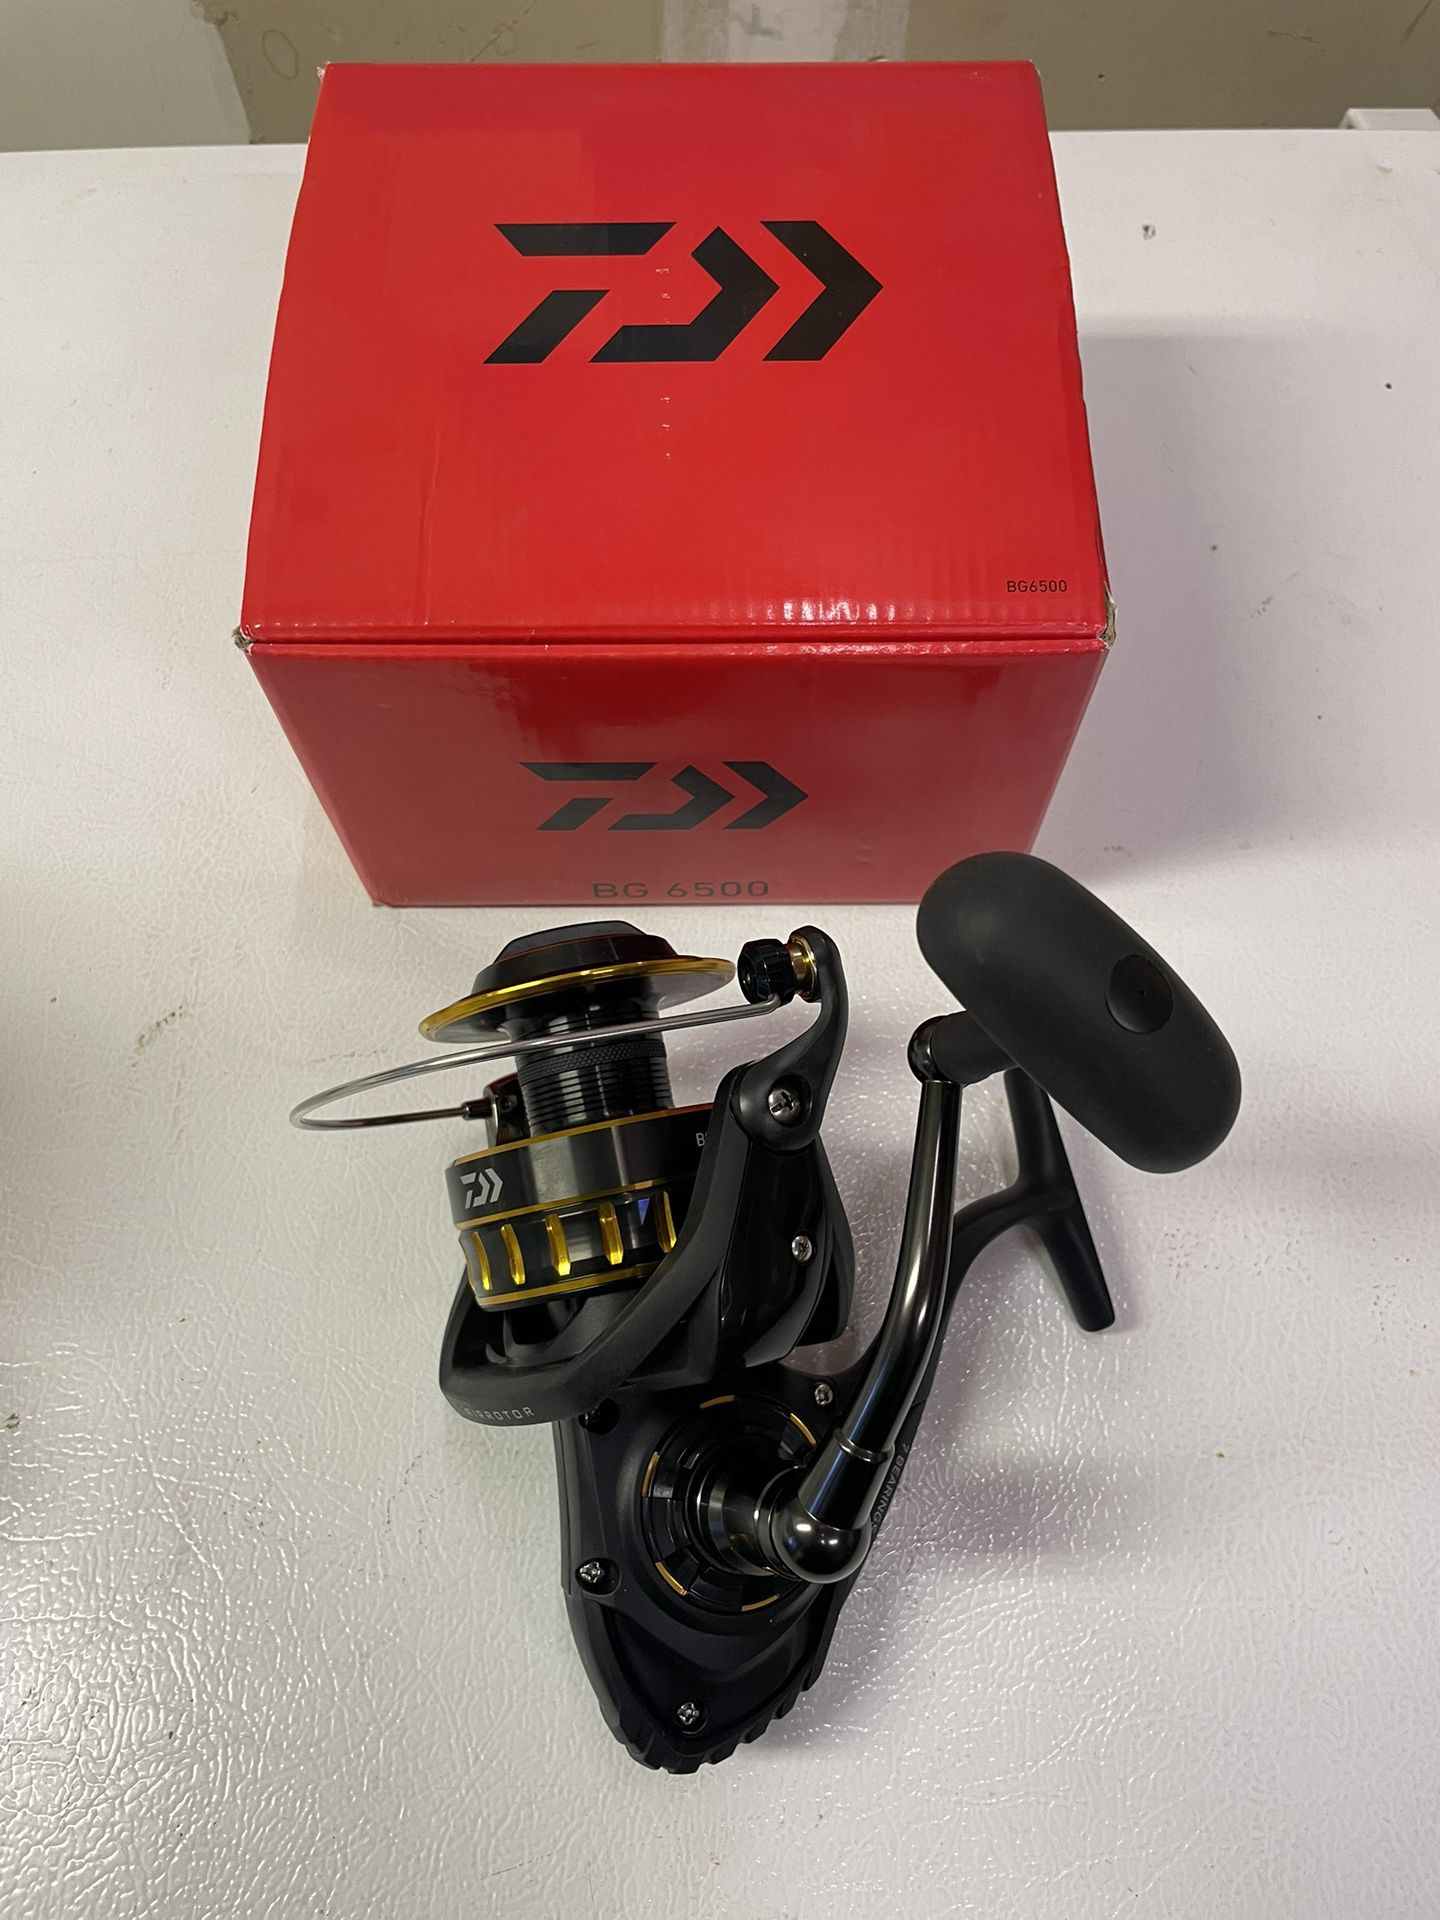 Daiwa Bg6500 Spinning Reel - Brand New With Box for Sale in Tujunga, CA -  OfferUp